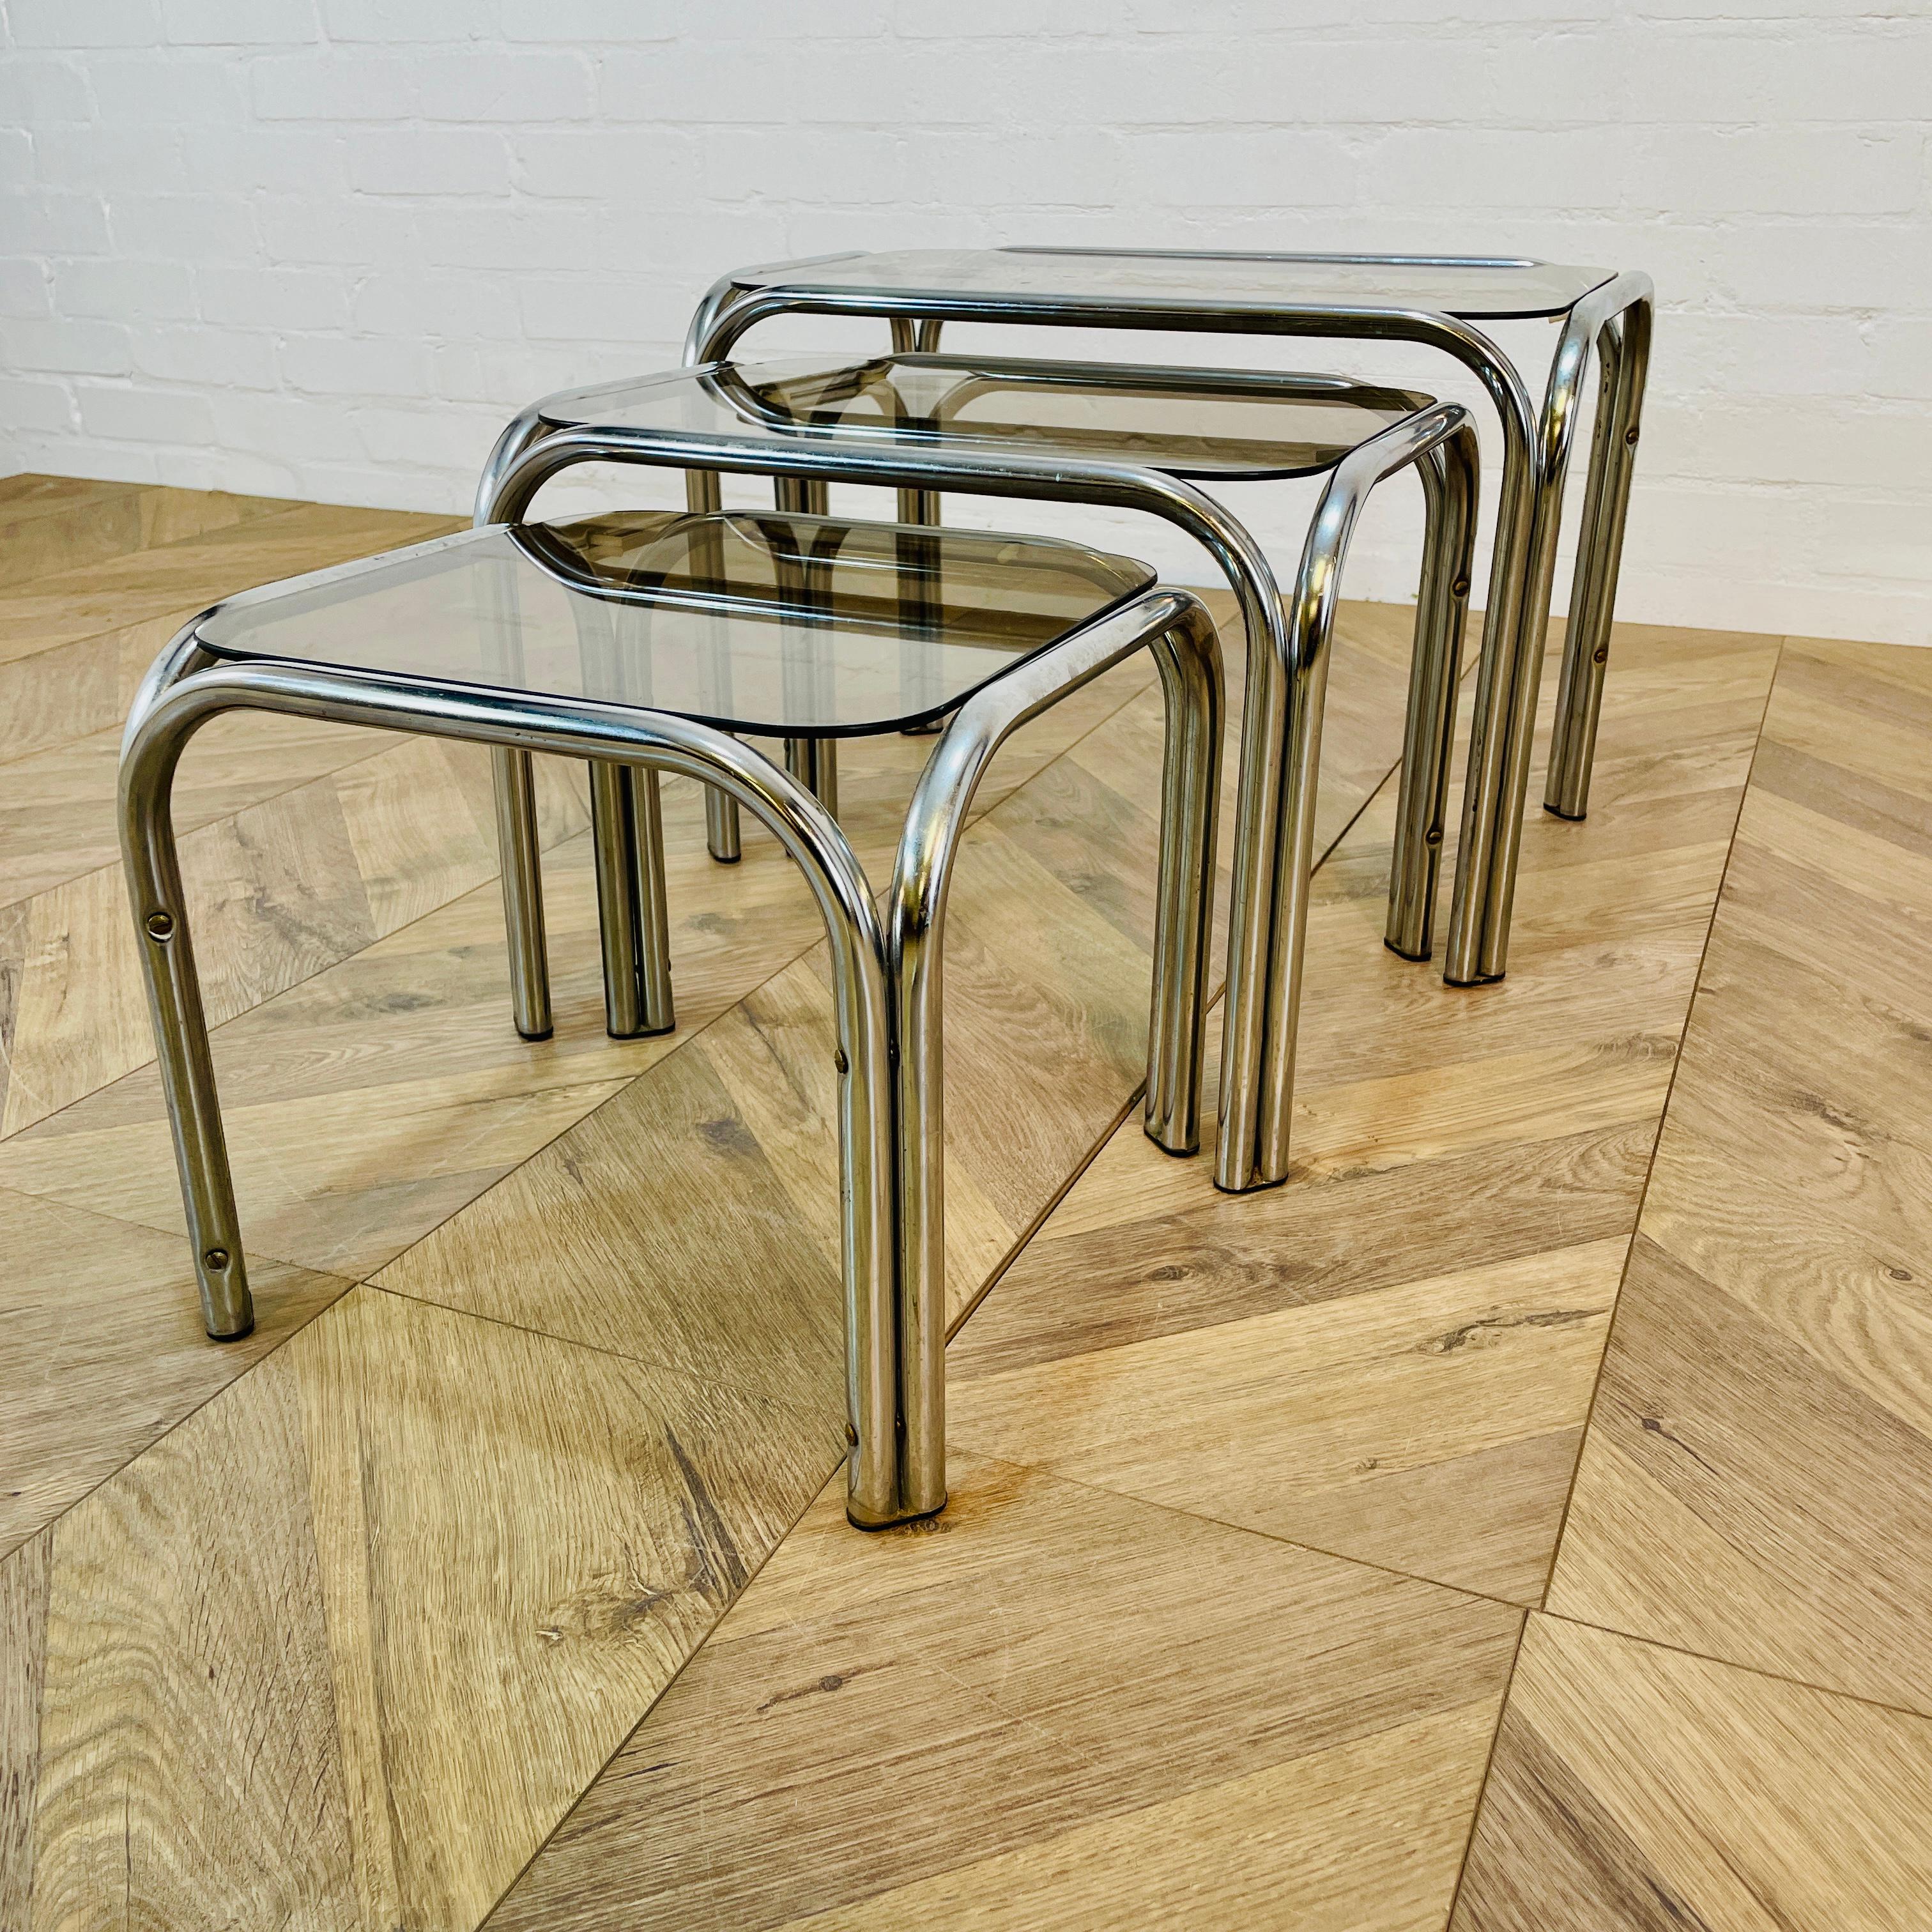 Italian Vintage Smoked Glass + Chrome Nest of Tables, Set of 3, 1970s For Sale